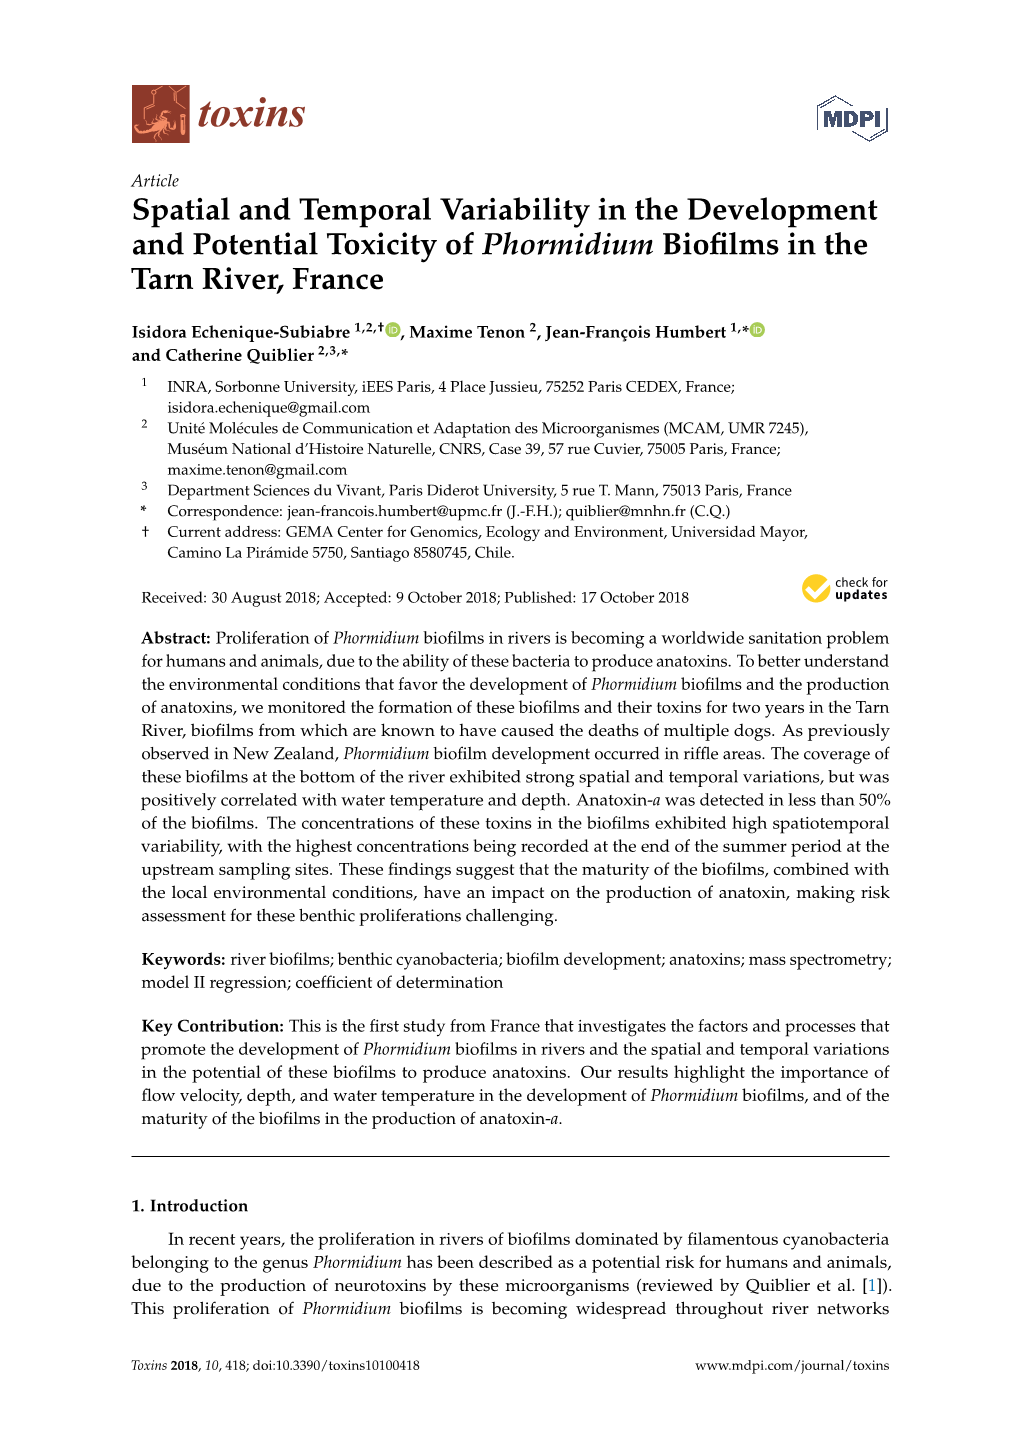 Spatial and Temporal Variability in the Development and Potential Toxicity of Phormidium Bioﬁlms in the Tarn River, France